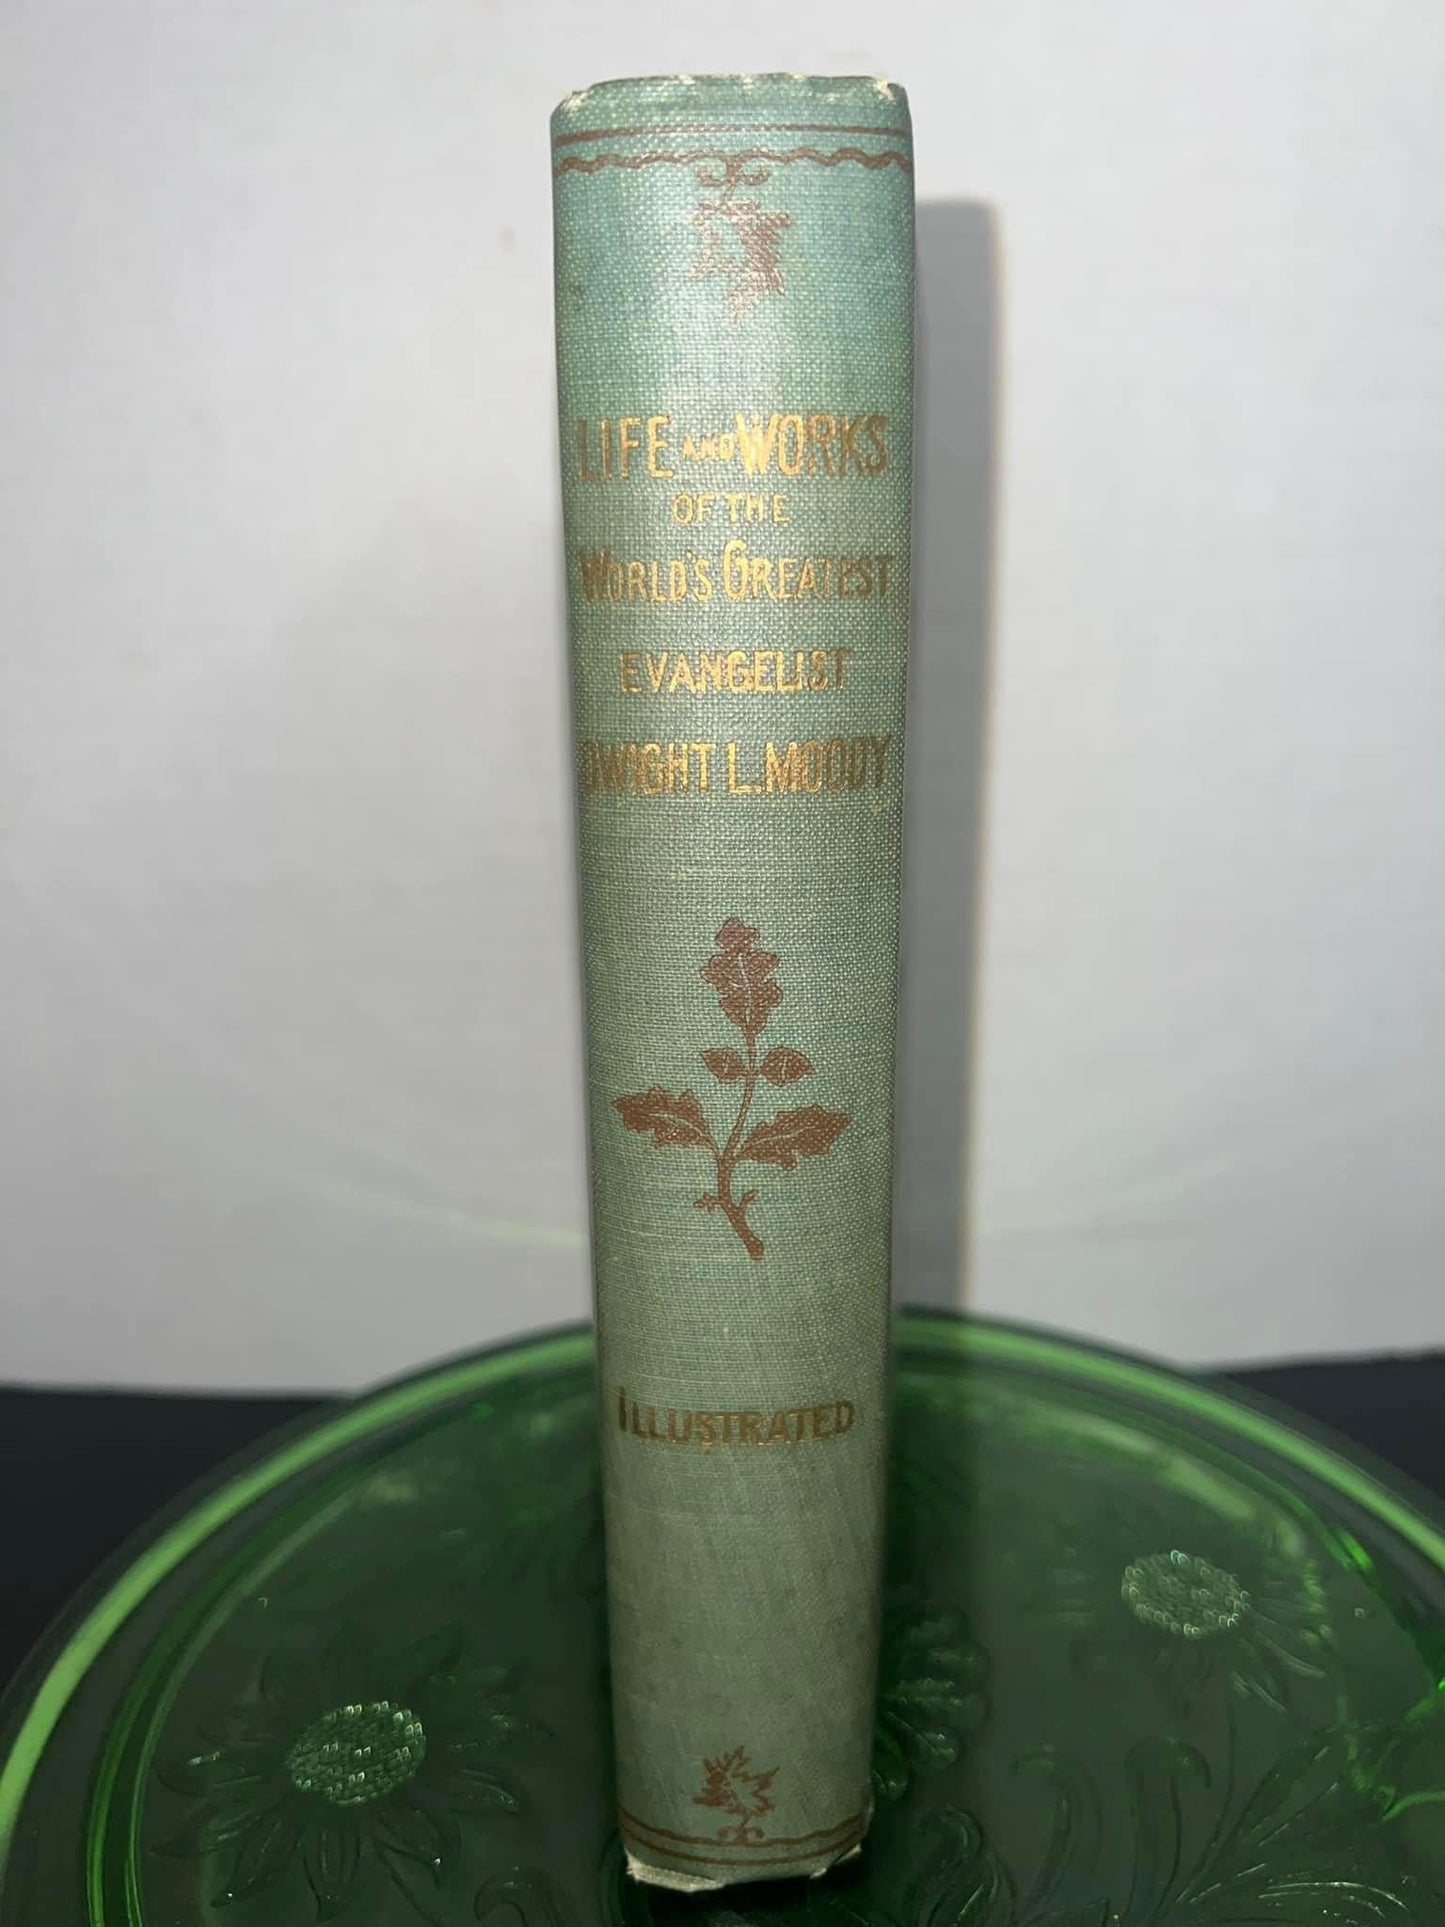 Antique 1900 The life and works of tge world’s greatest evangelist Dwight l. Moody Illustrated